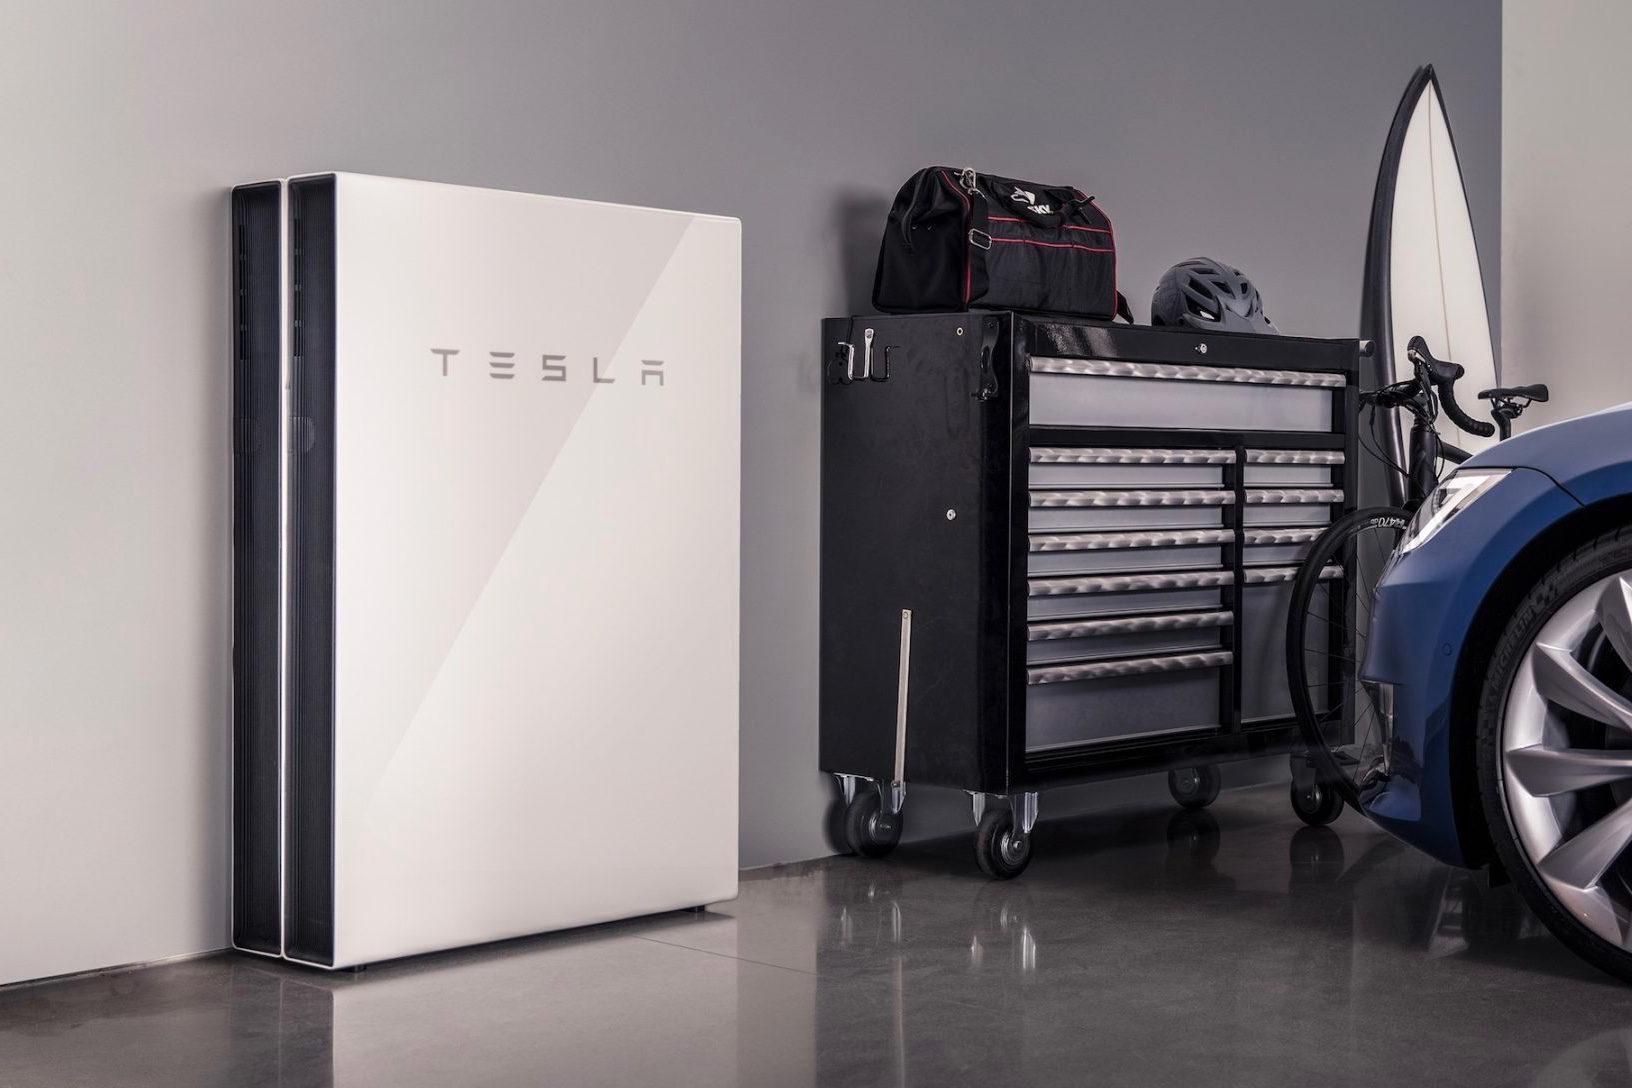 Tesla Powerwall installation now available in Japan - Drive Tesla